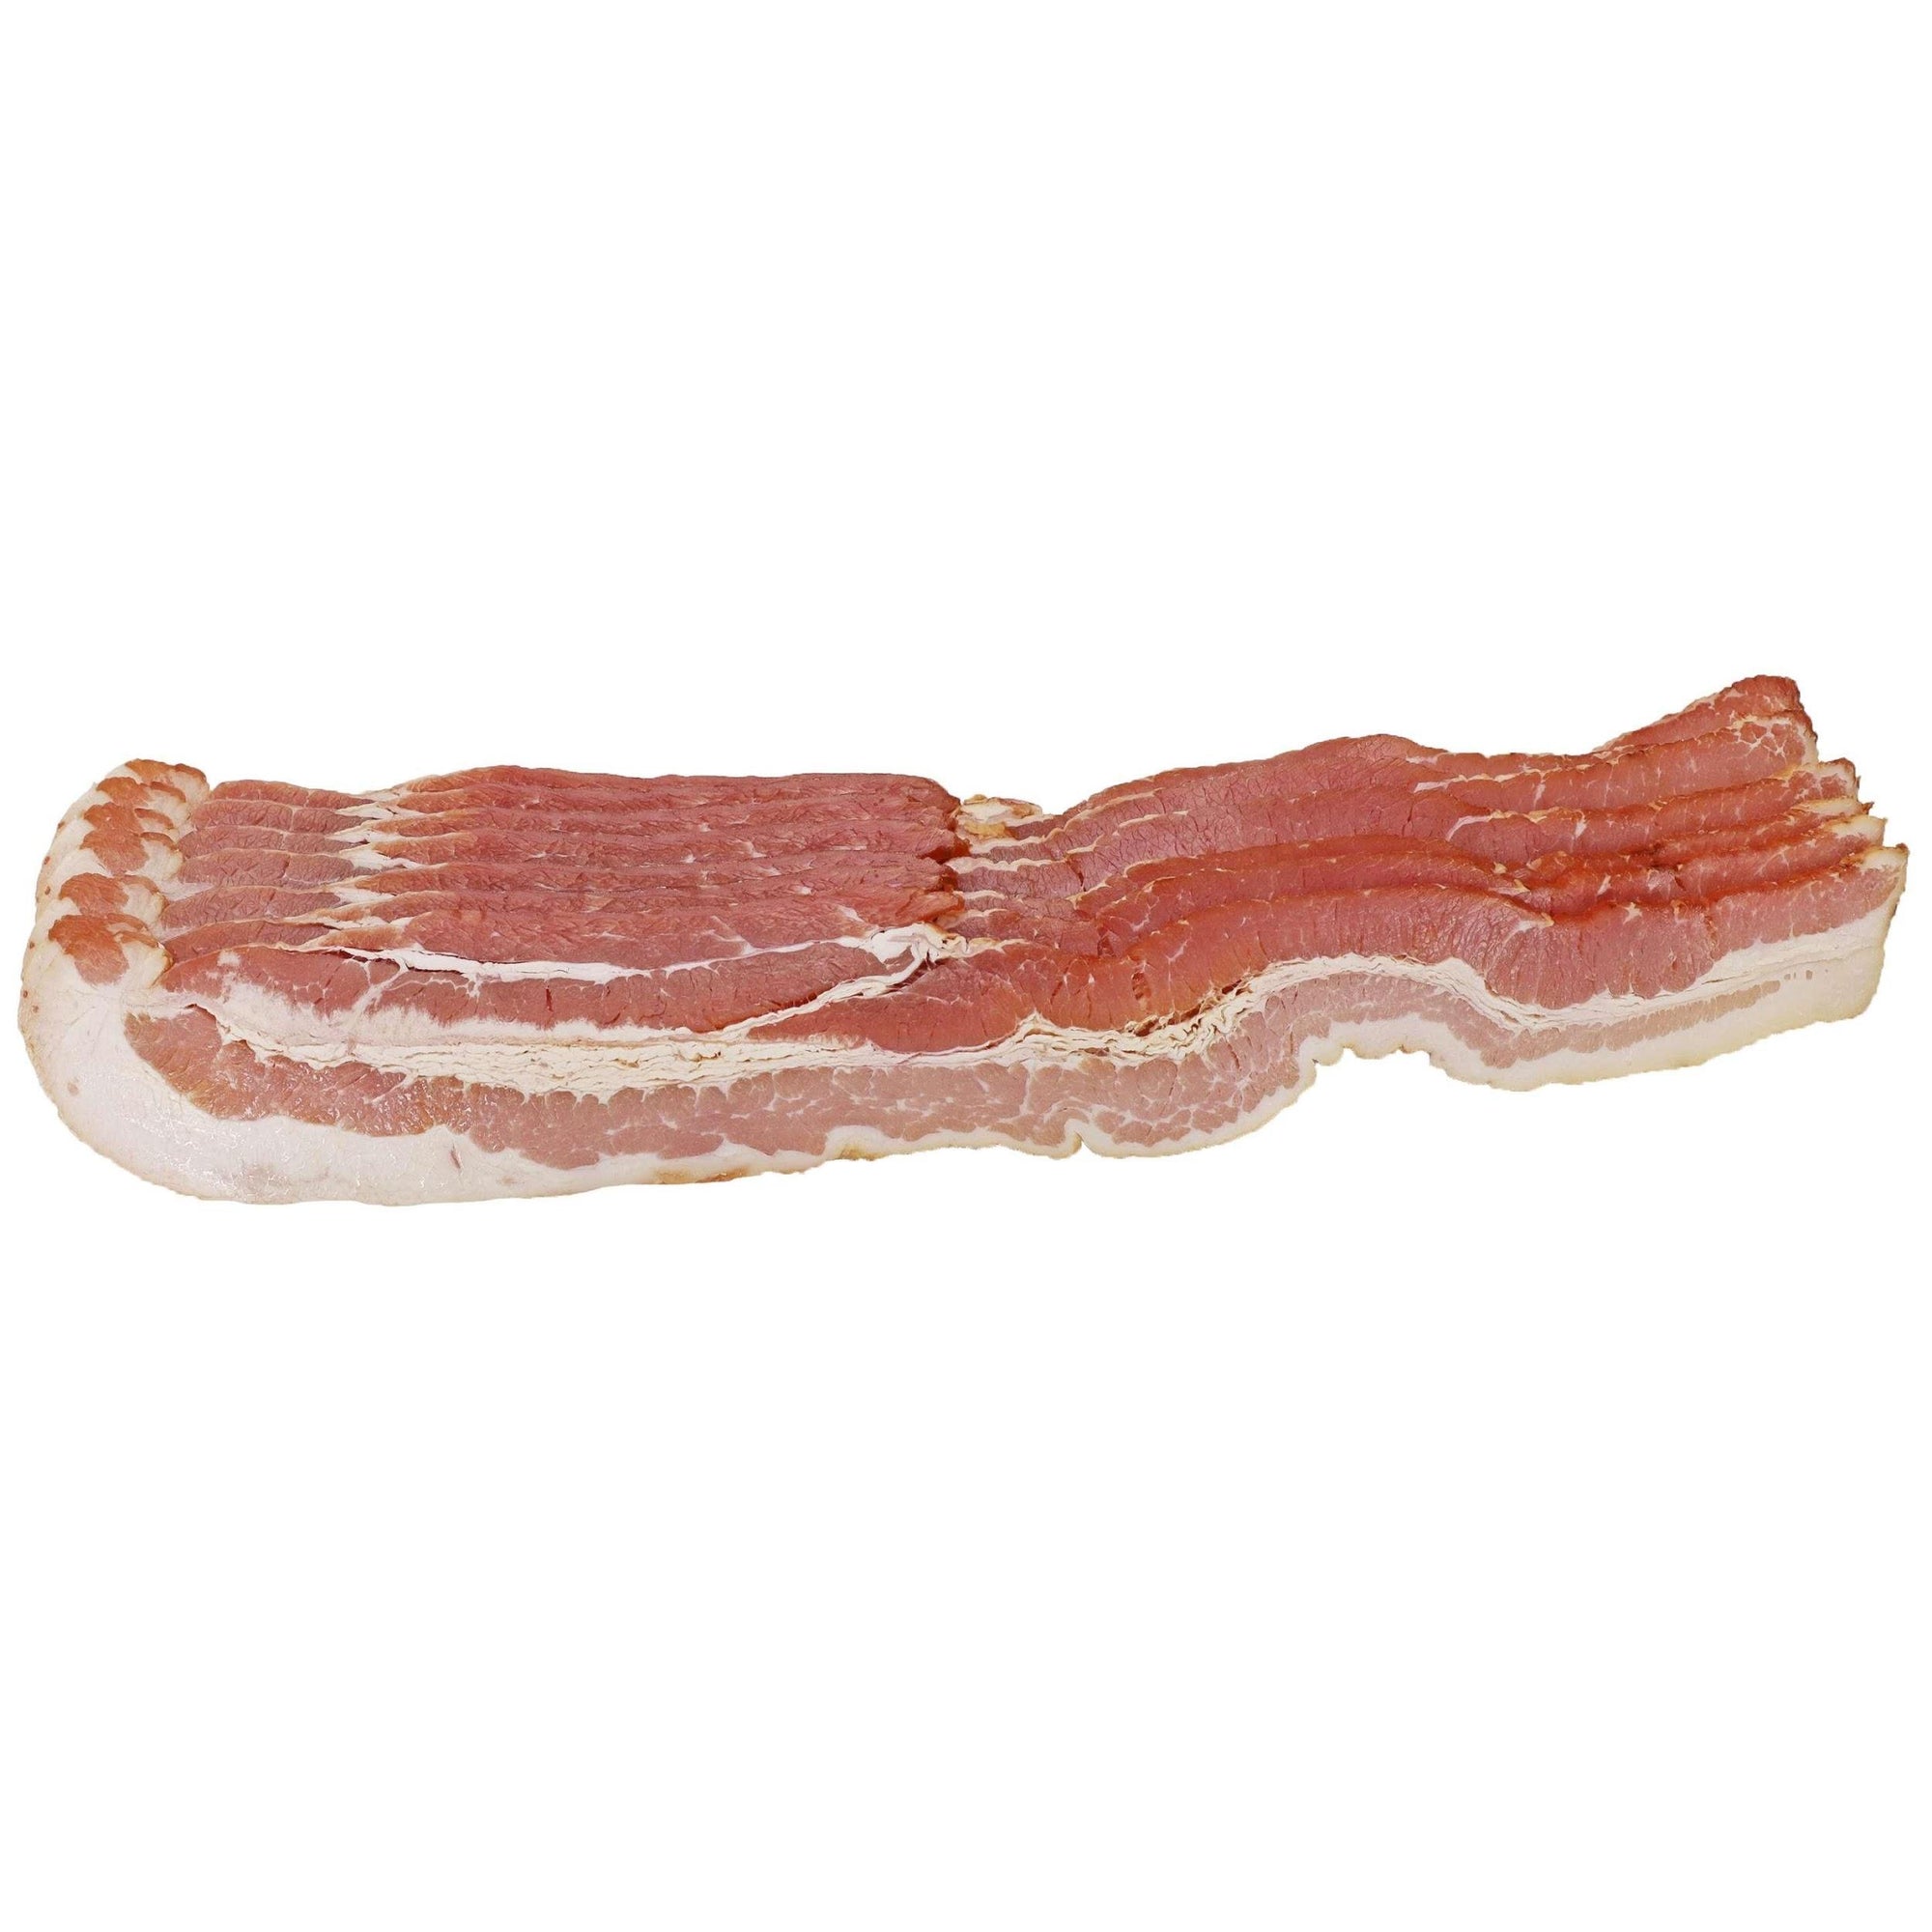 Applewood Double Smoked Bacon (14-18 Slices/lb)